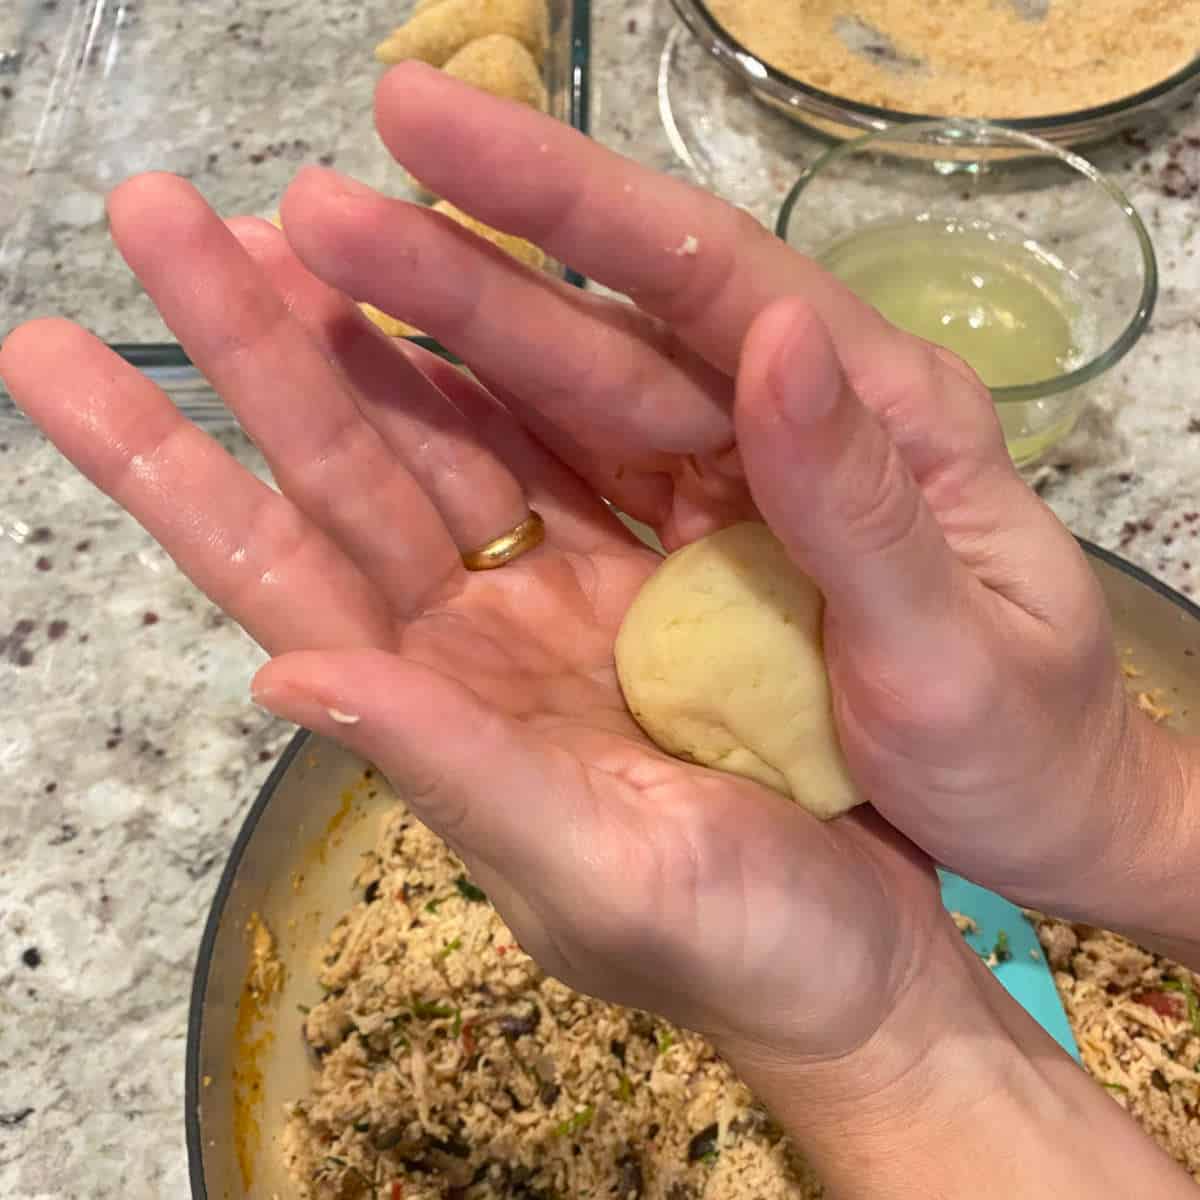 shaping the dough in a teardrop form.